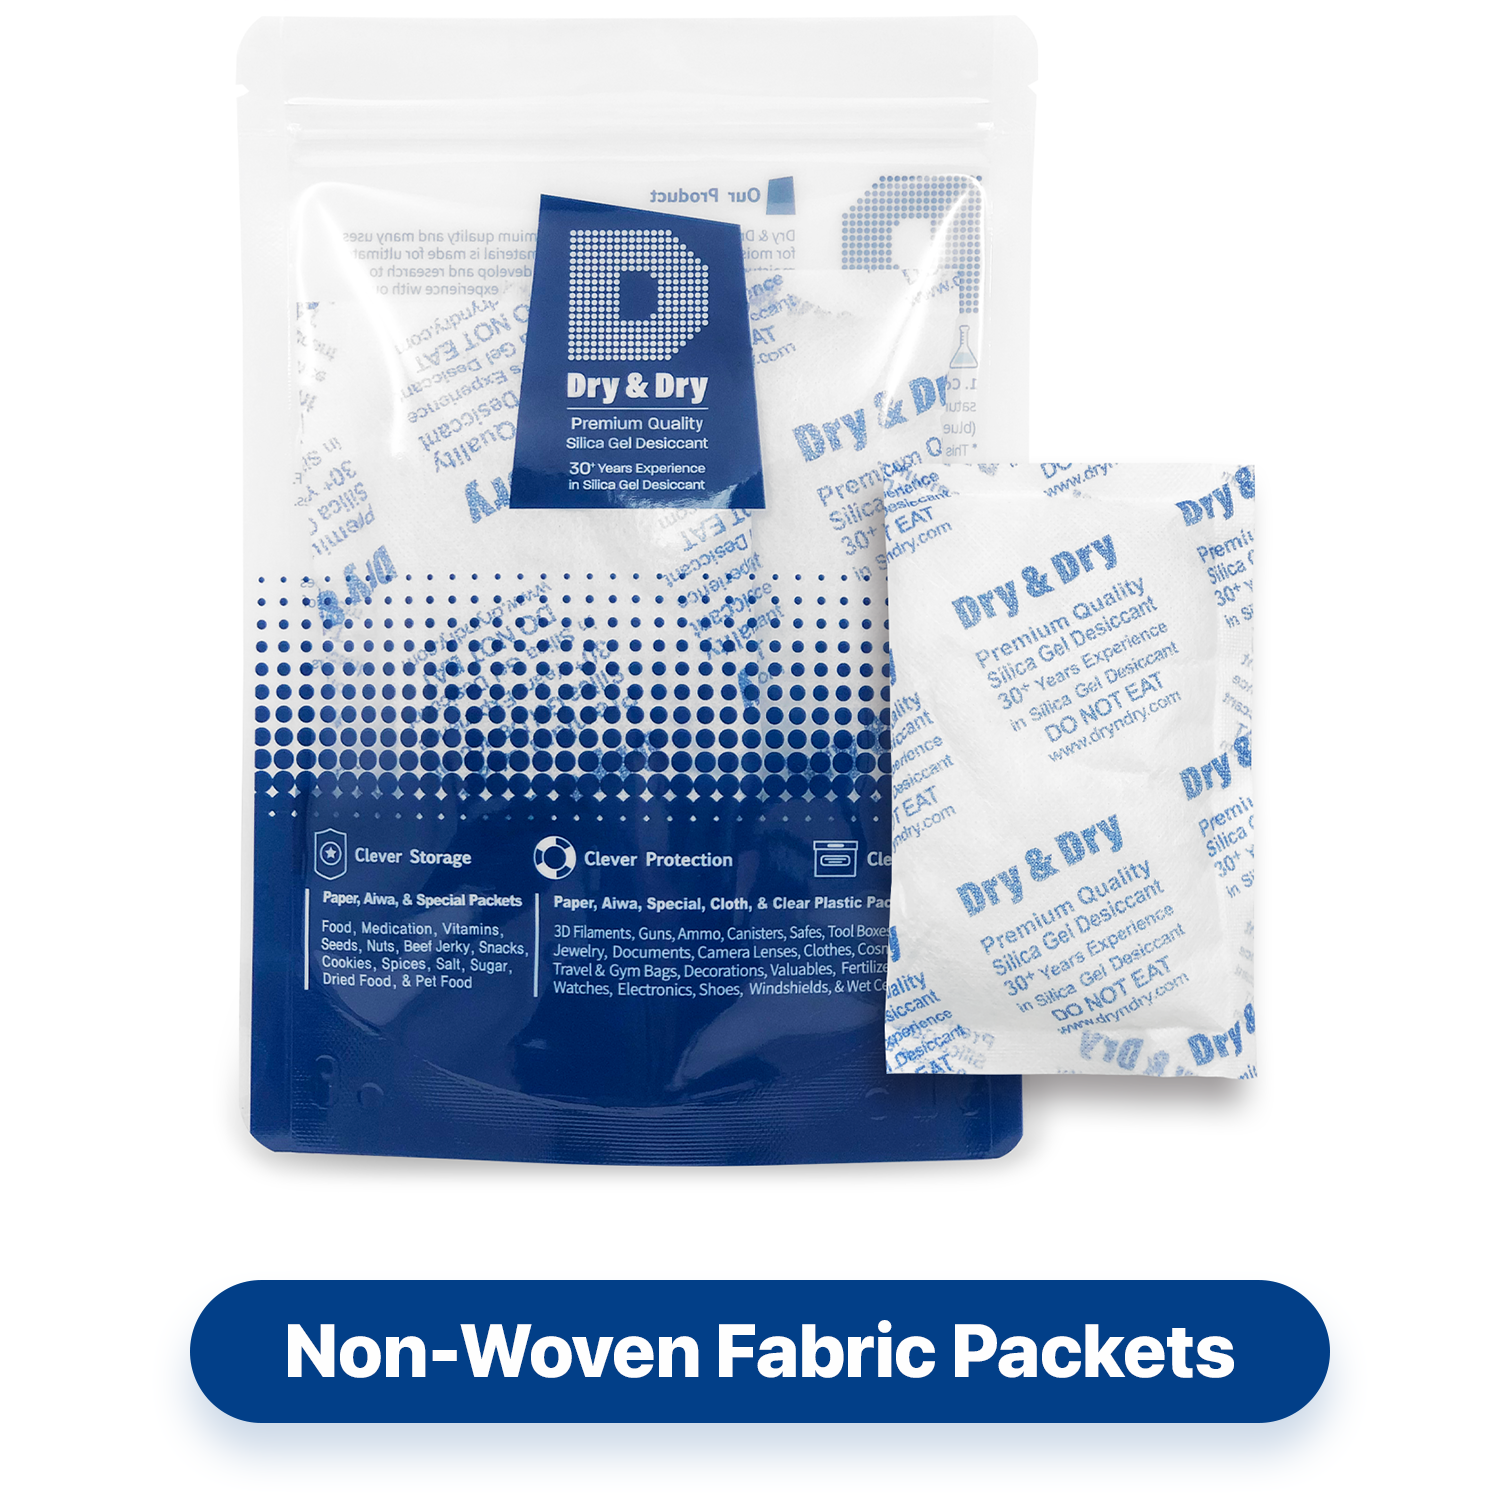 100 Gram Non-Woven Fabric(Cloth) Packets